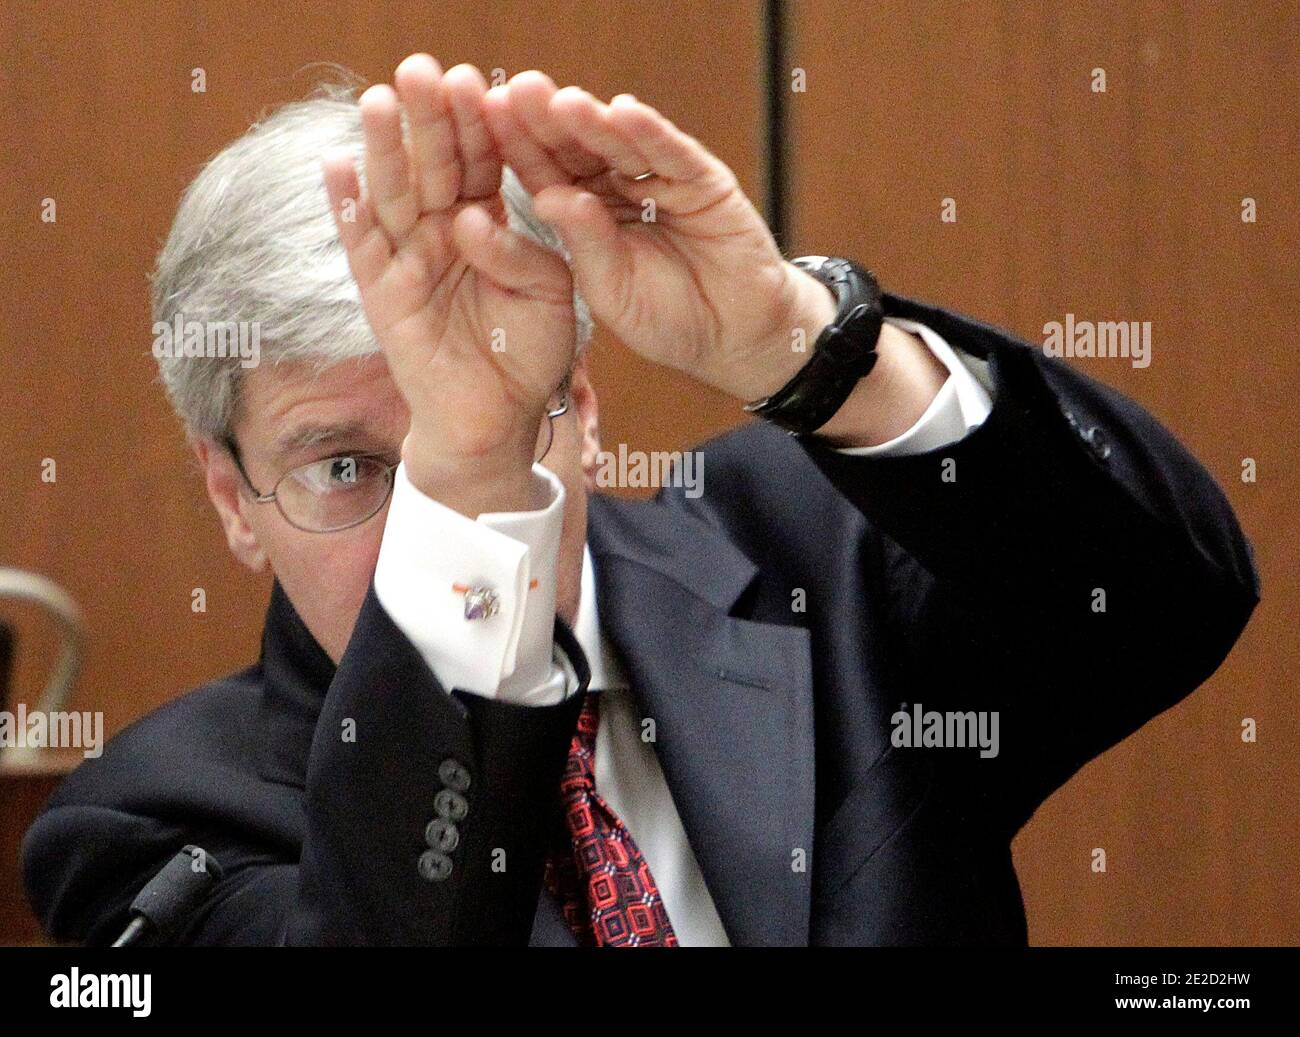 Anesthesiology expert Dr. Steven Shafer testifies during Dr. Conrad Murray's involuntary manslaughter trial in Los Angeles on October 20, 2011. Murray has pleaded not guilty and faces four years in prison and the loss of his medical license if convicted of involuntary manslaughter in Michael Jackson's death. Photo by Reed Saxon/Pool/ABACAPRESS.COM Stock Photo